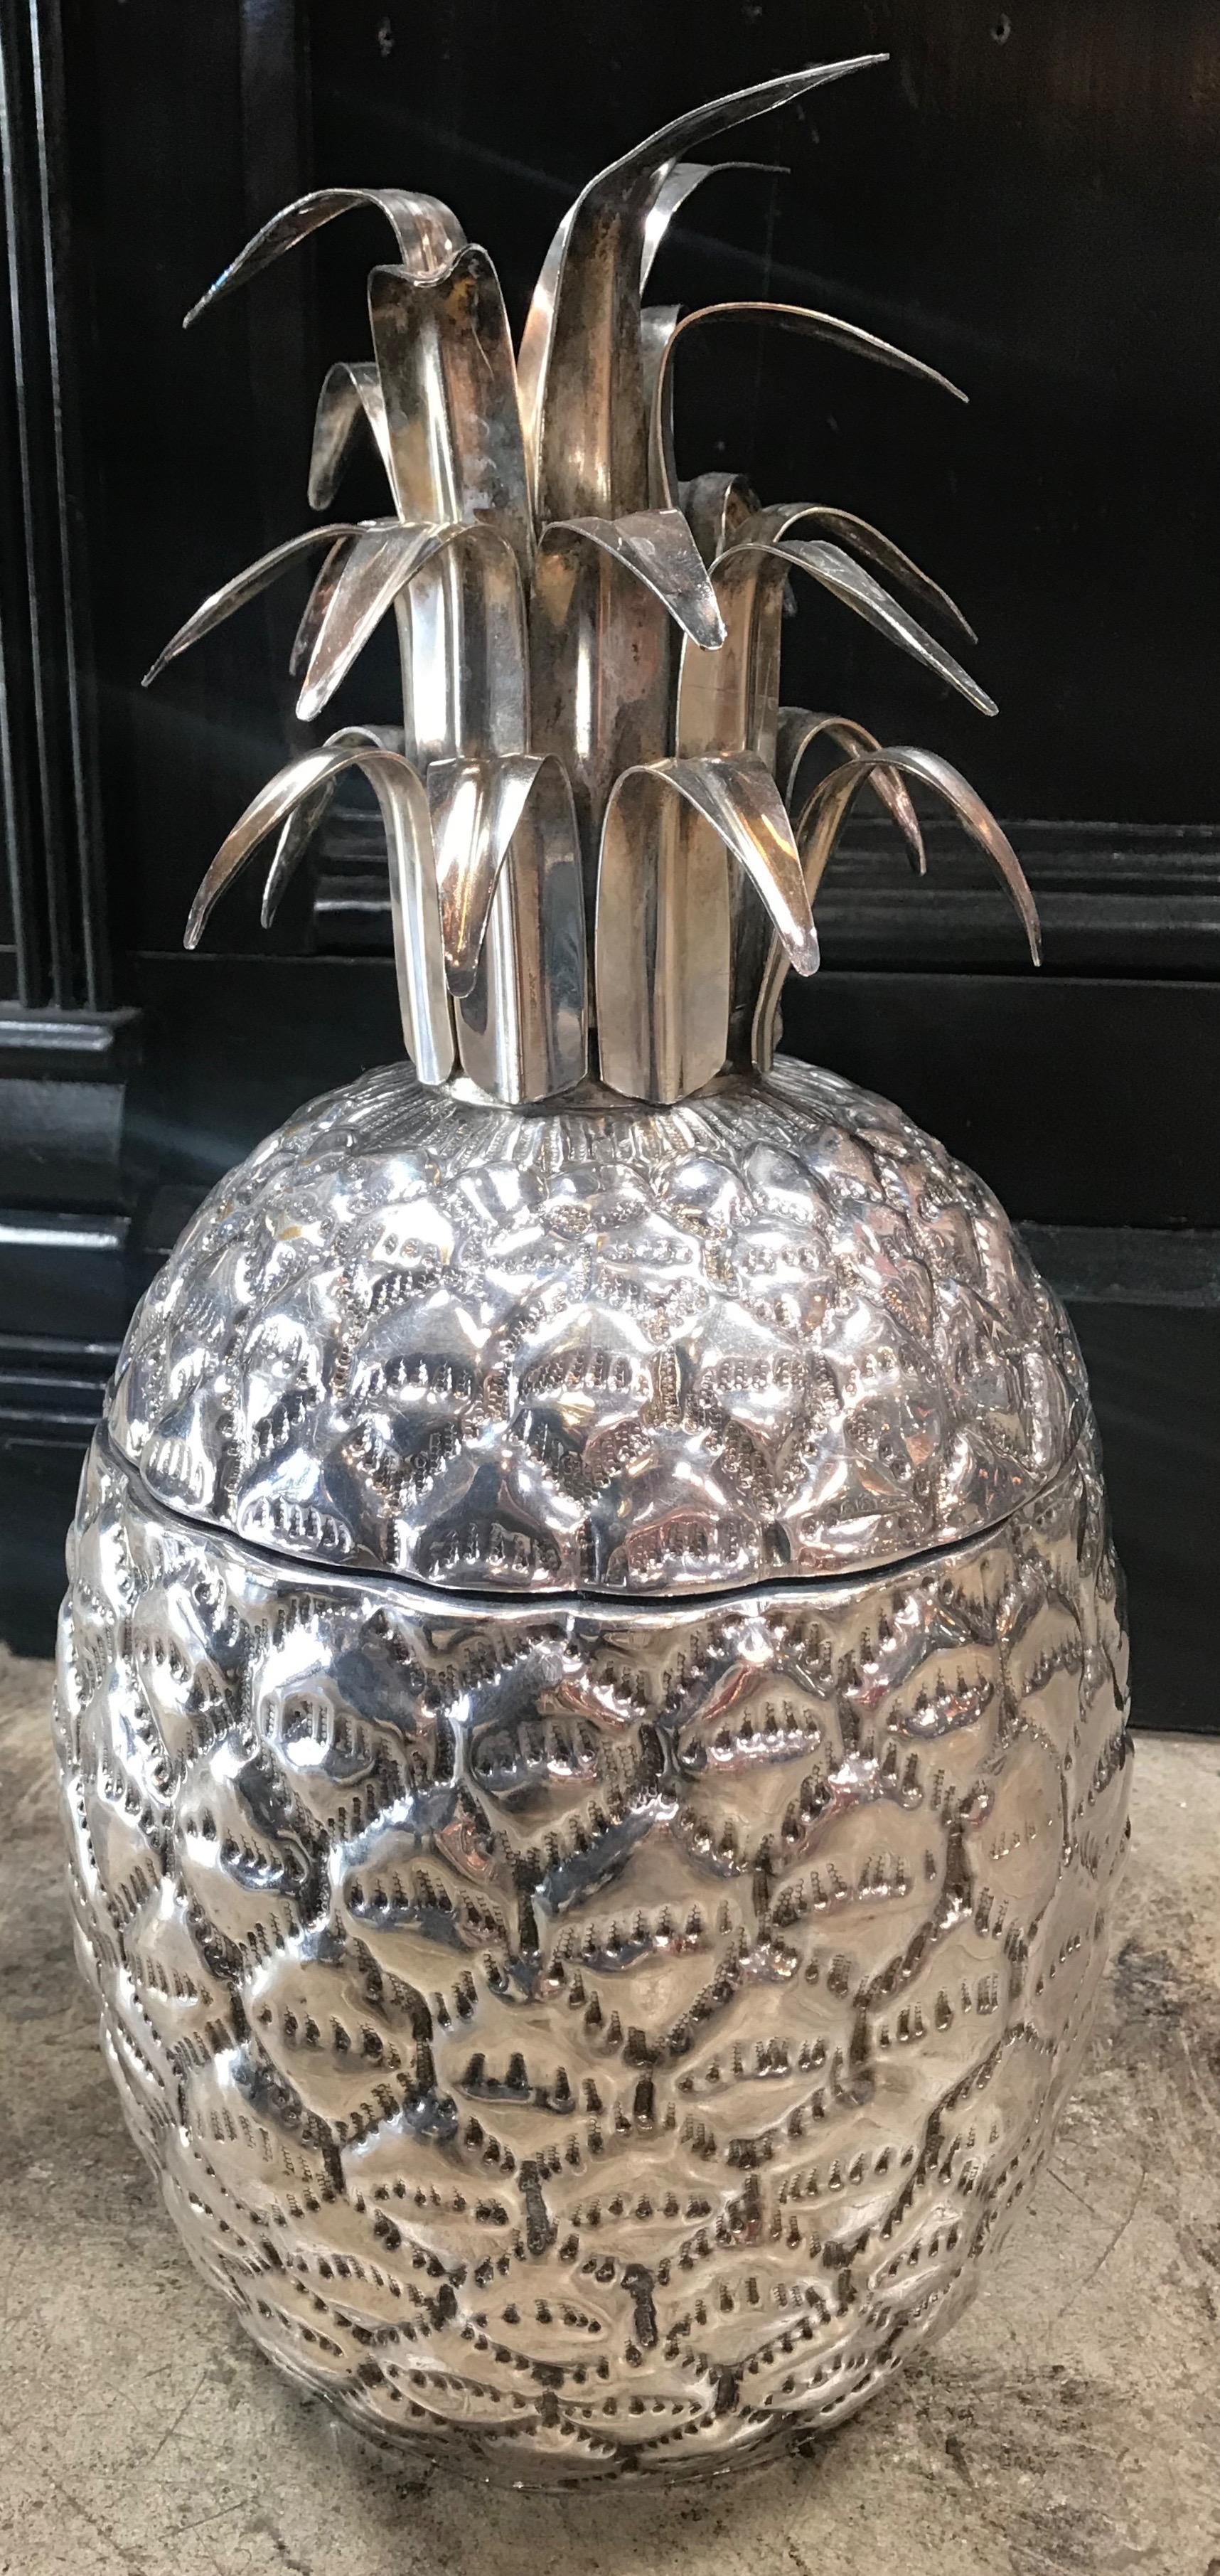 Silvered pineapple ice bucket made in Florence, Italy by Teghini.